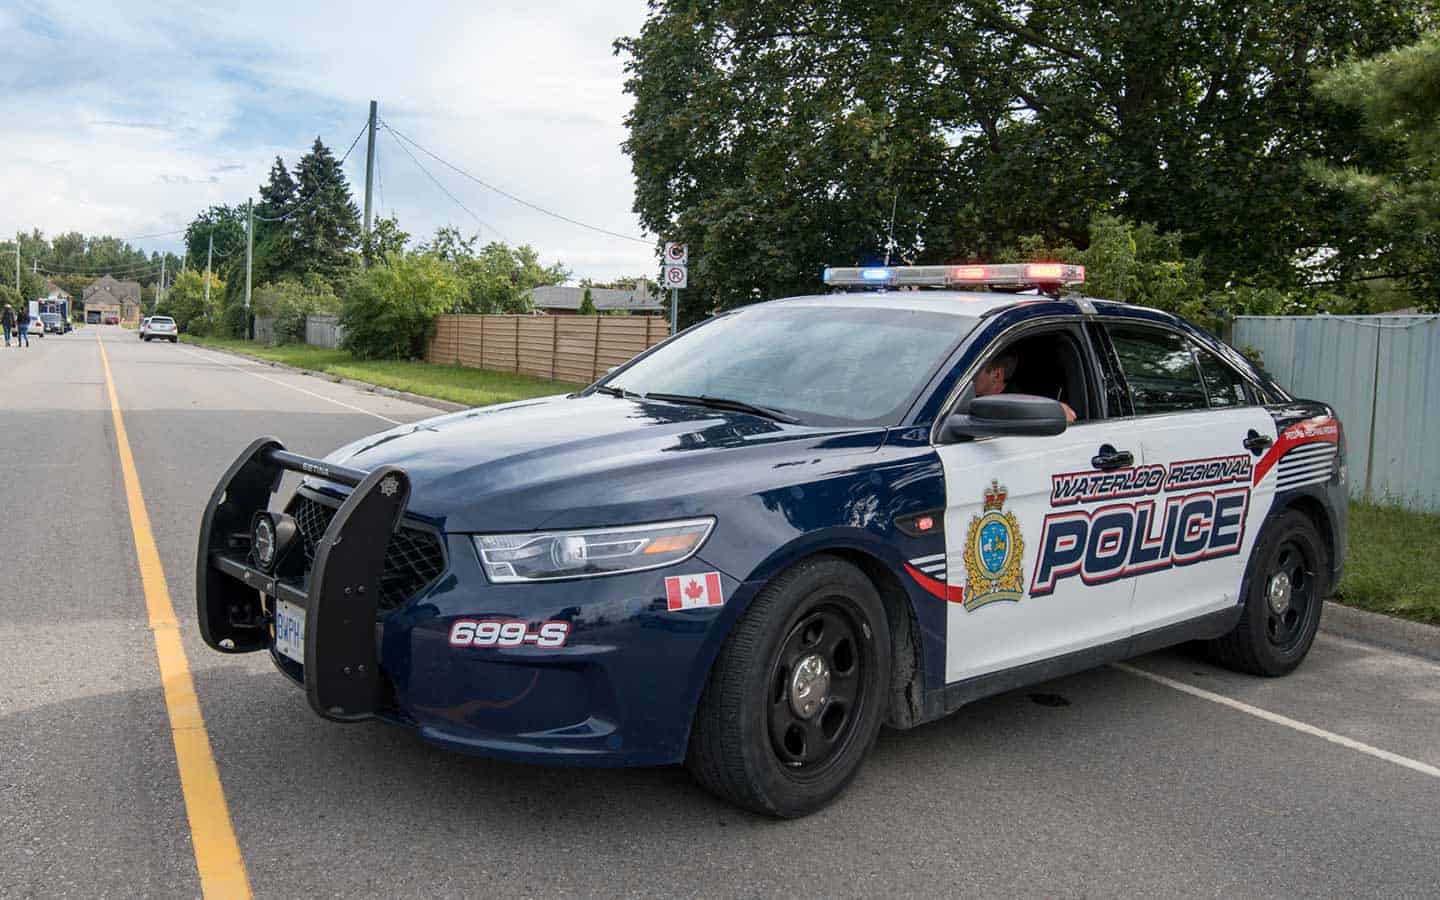 OPP rolls out new technologies, including in-car camera systems